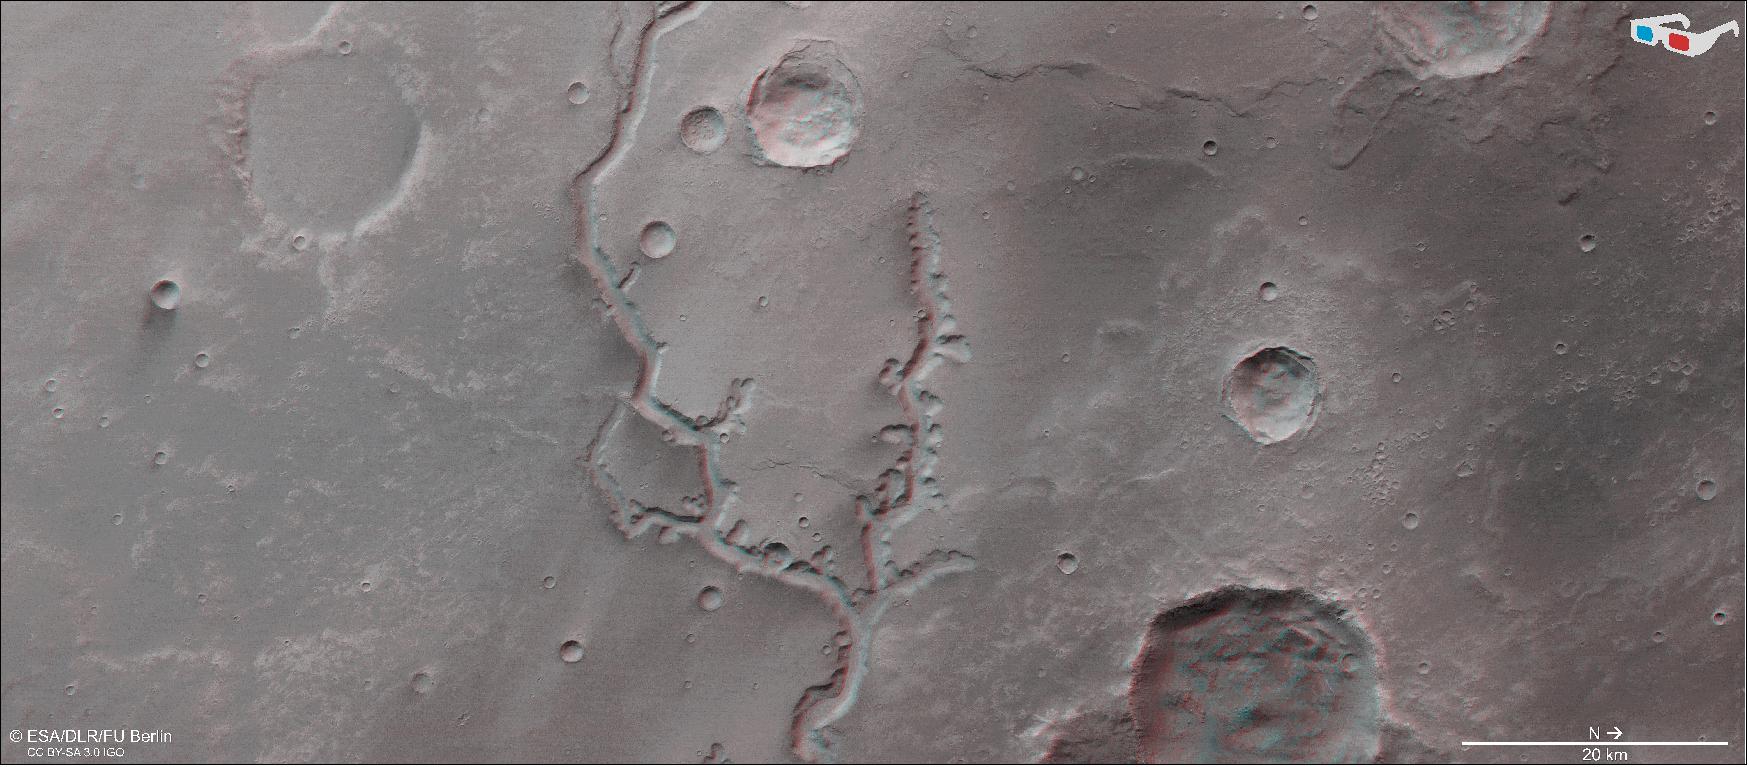 Figure 16: Nirgal Vallis in 3D. This image shows Nirgal Vallis, a dried-up river valley on Mars, in 3D when viewed using red-green or red-blue glasses. This anaglyph was derived from data obtained by the nadir and stereo channels of the HRSC on ESA's Mars Express during spacecraft orbit 18818. It covers a part of the martian surface centered at about 315ºE/27ºS. North is to the right (image credit: ESA/DLR/FU Berlin, , CC BY-SA 3.0 IGO)